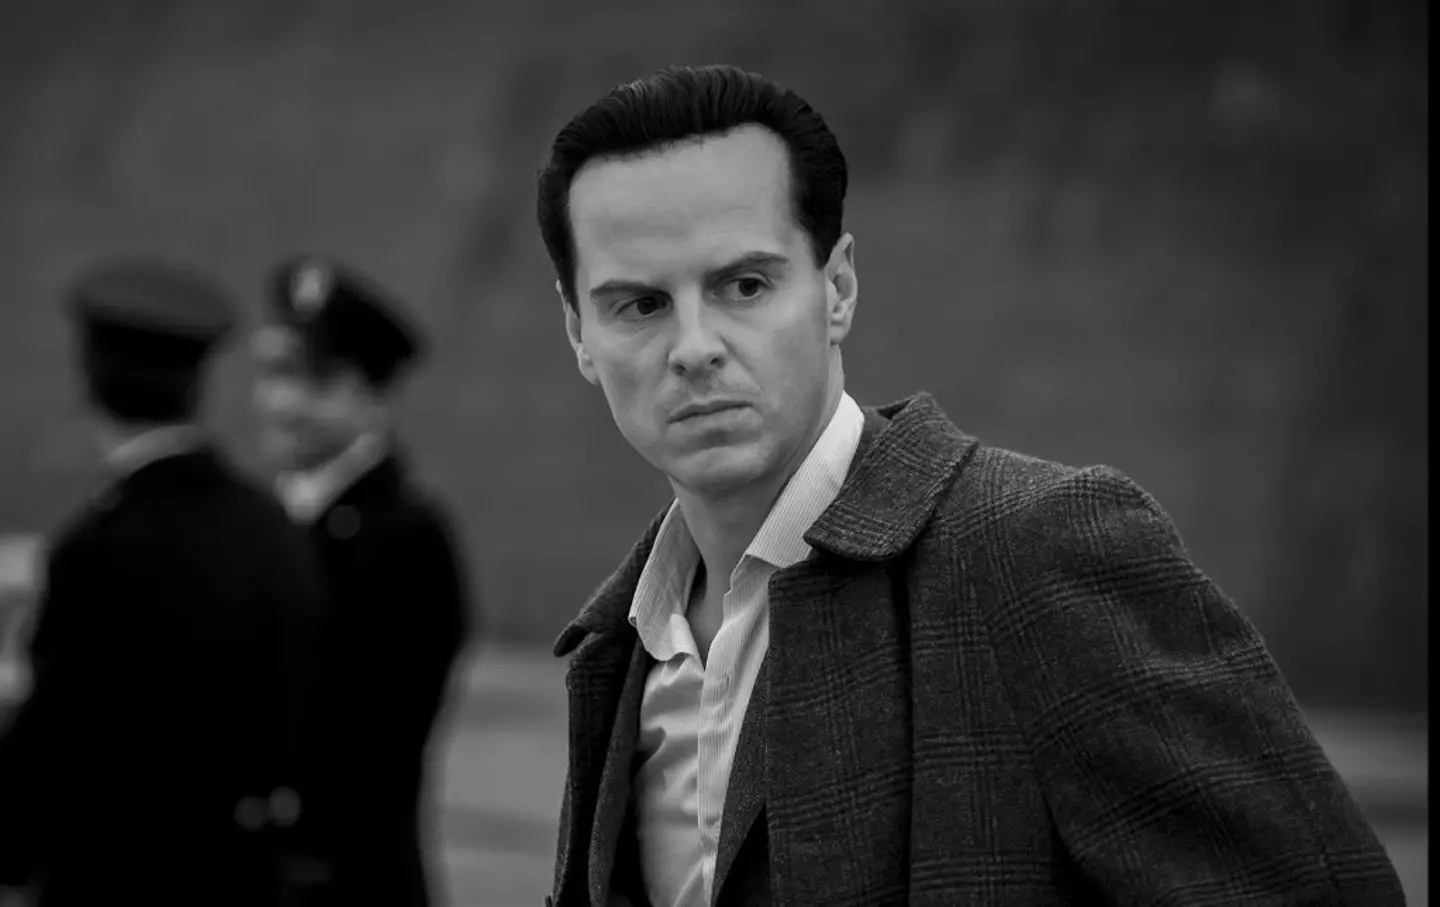 Fans are raving about Andrew Scott's performance.